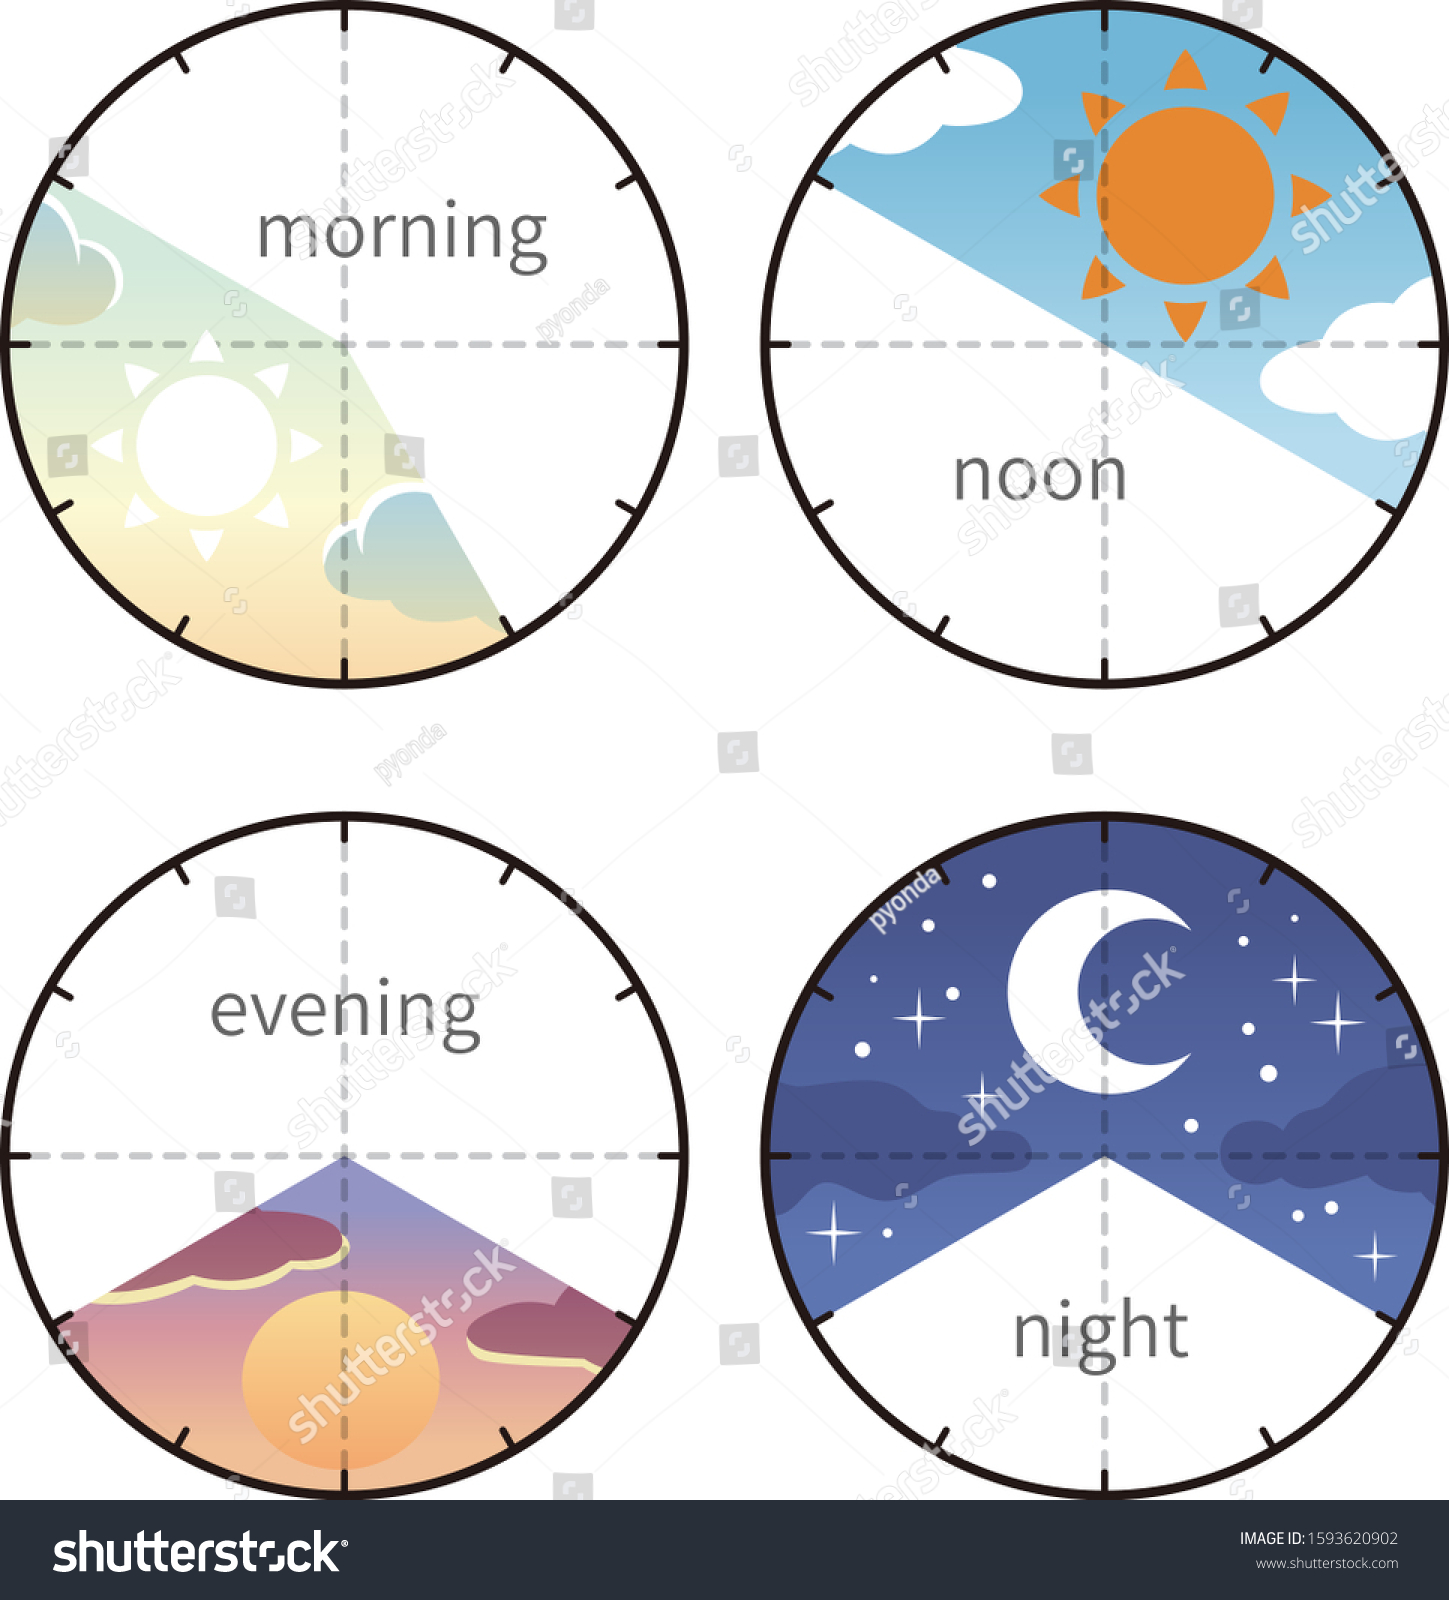 Morning, noon, evening, night time zone icons #1593620902